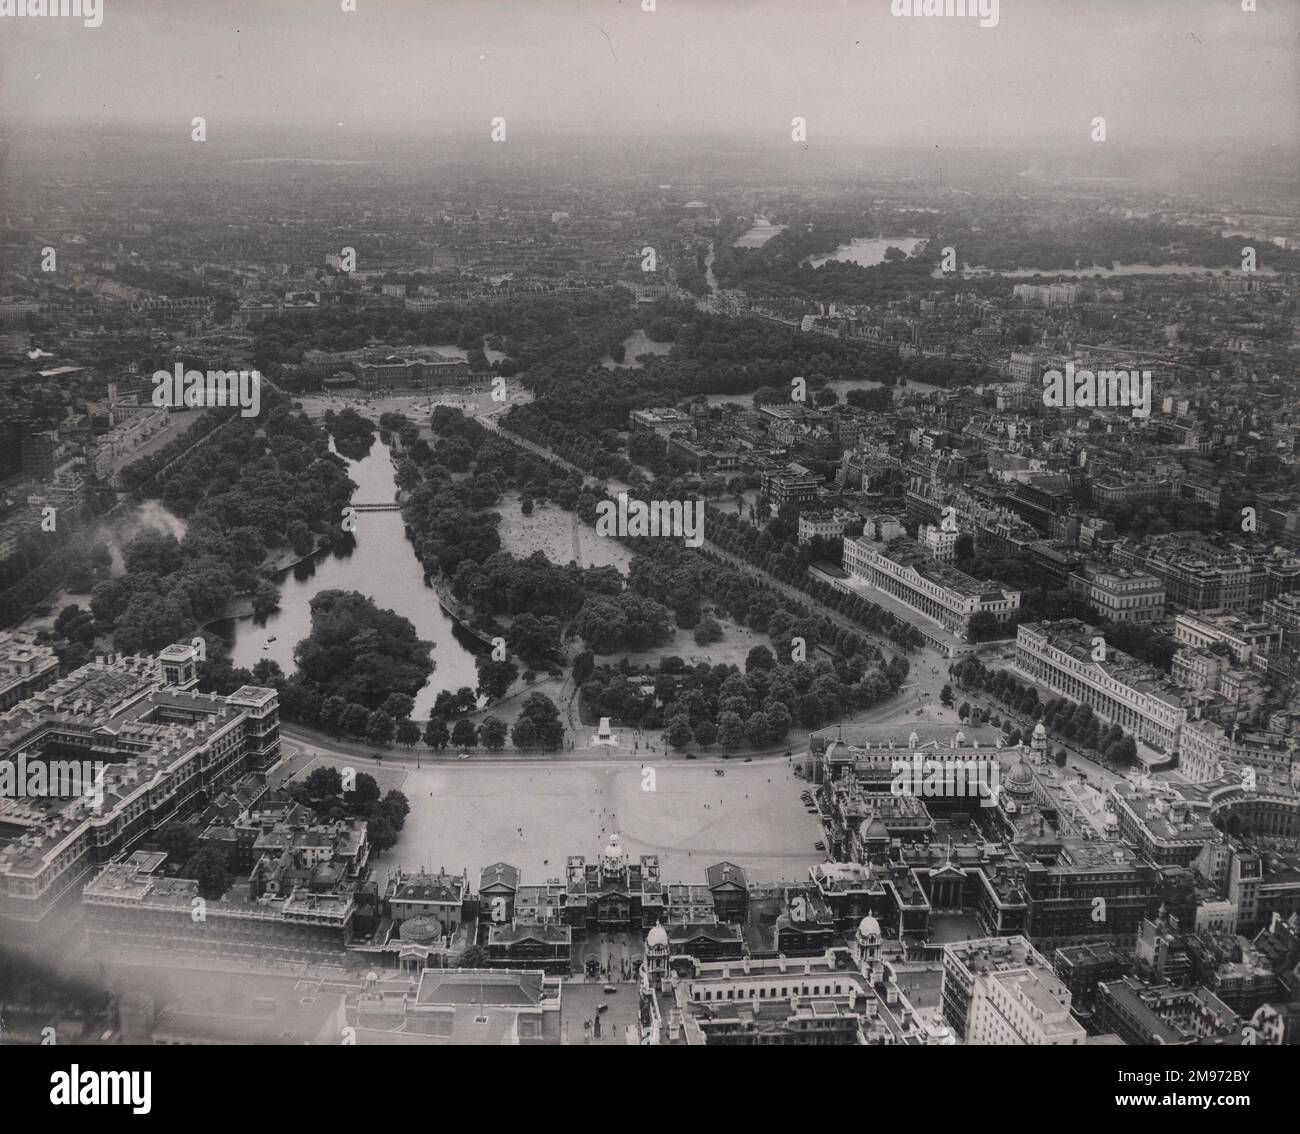 An aerial view of Horse Guards Parade, St James’ Park and Buckingham Palace, London. Stock Photo